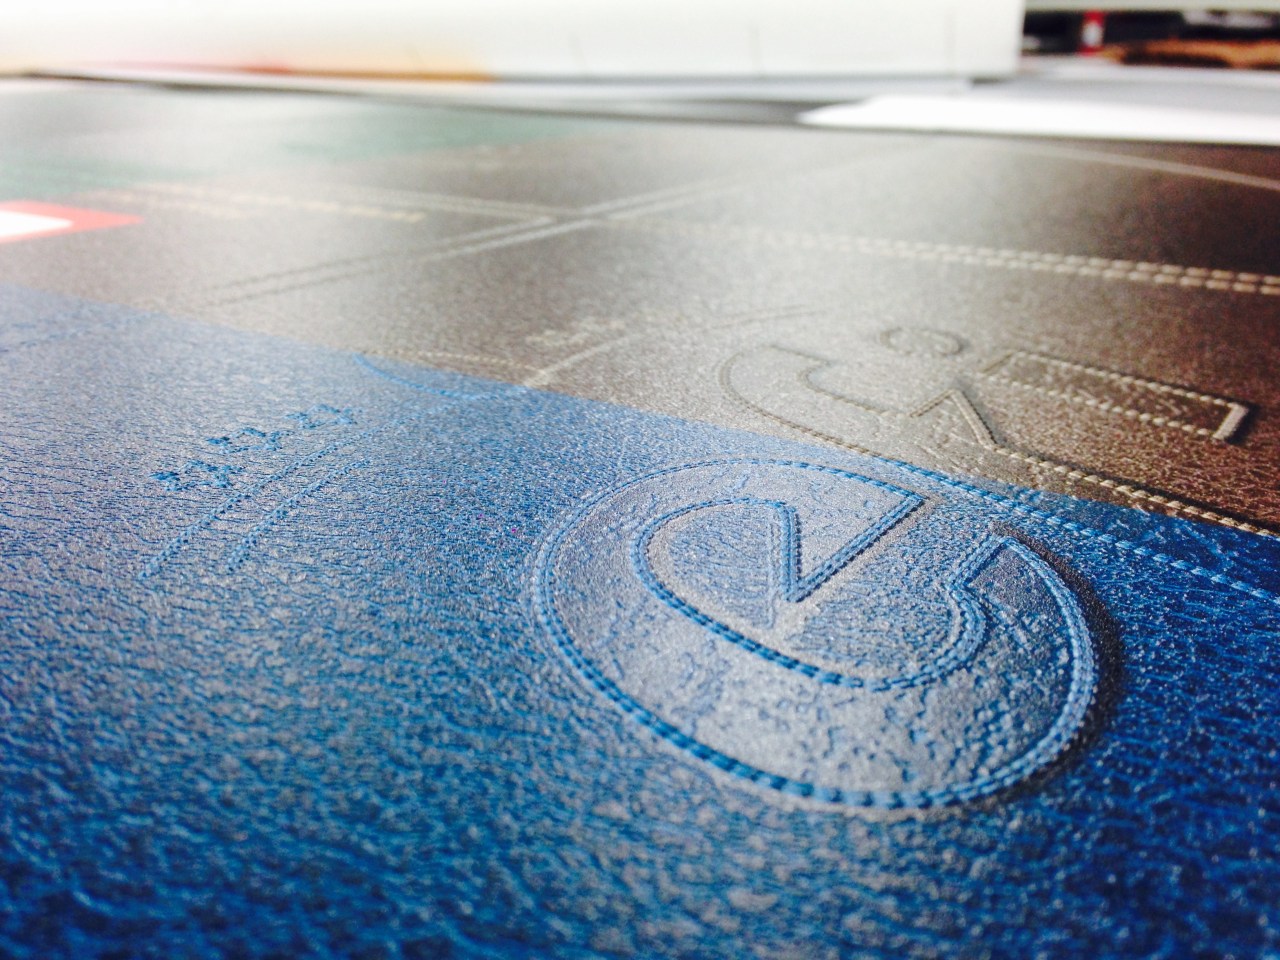 Table top printed with a simulated leather texture with EFI logo.